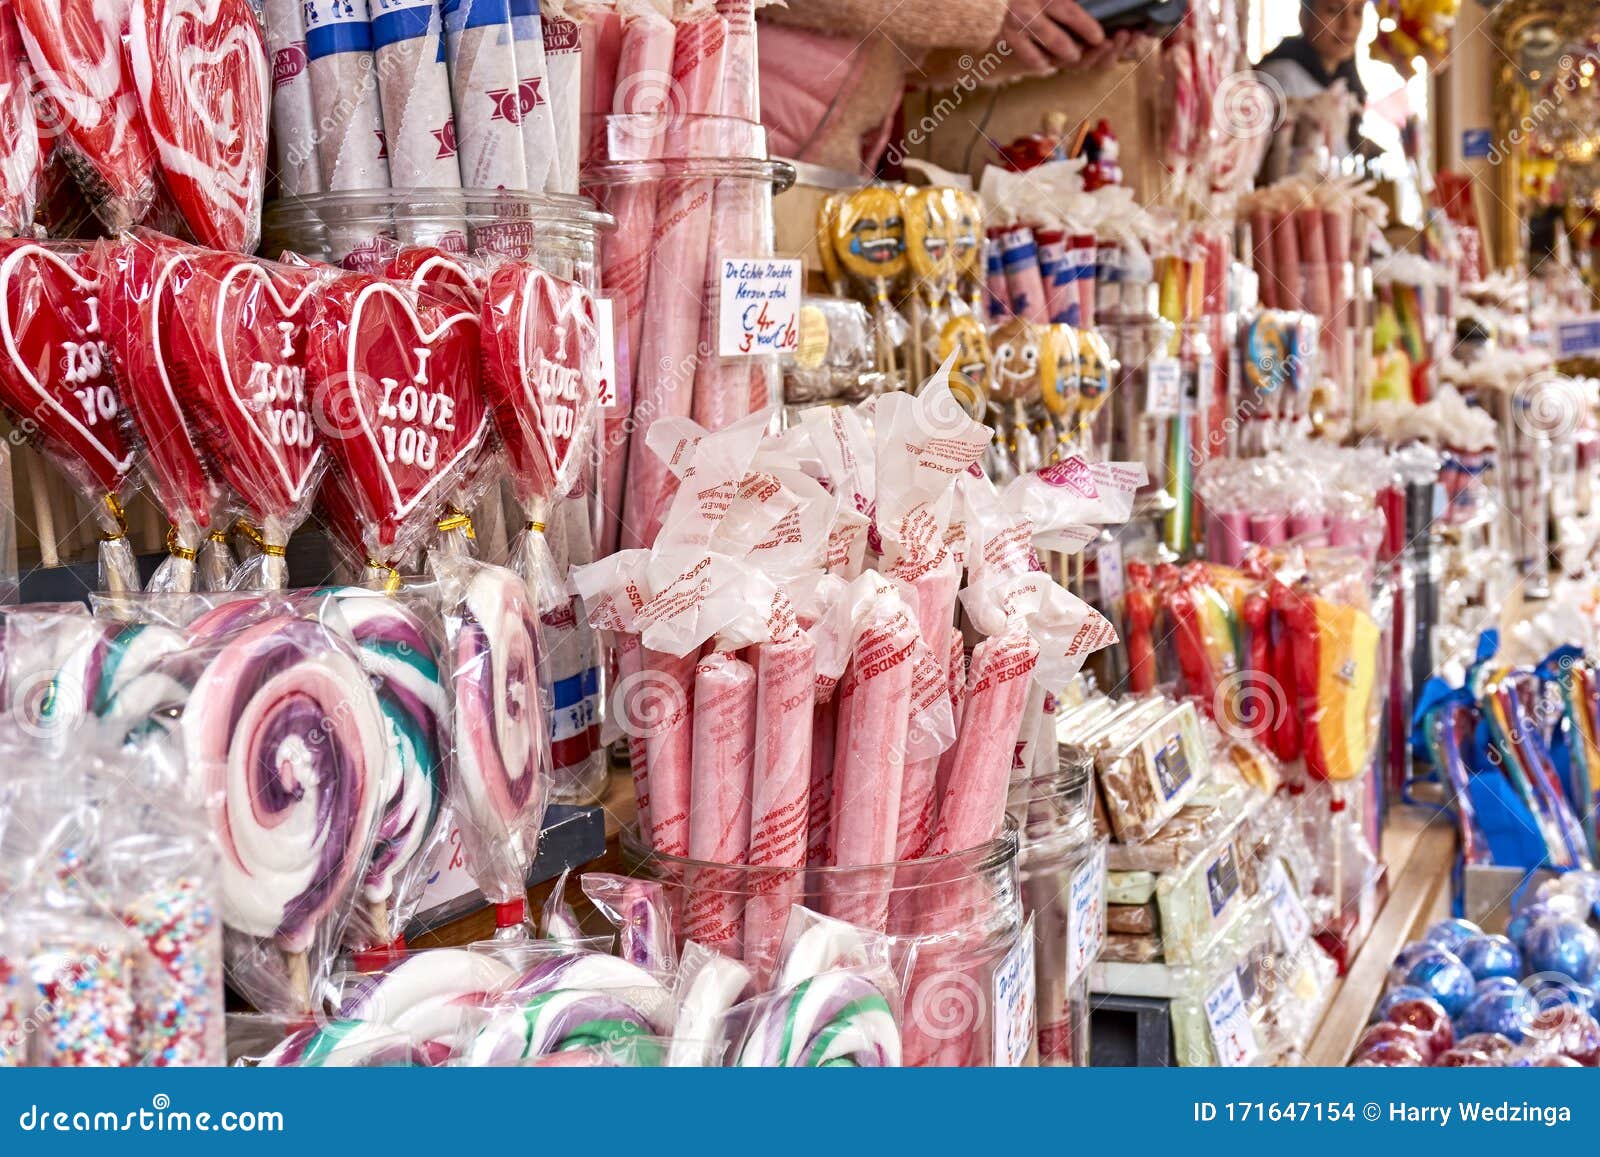 Many Colorful Candies In A Market Stall Editorial Stock Image Image